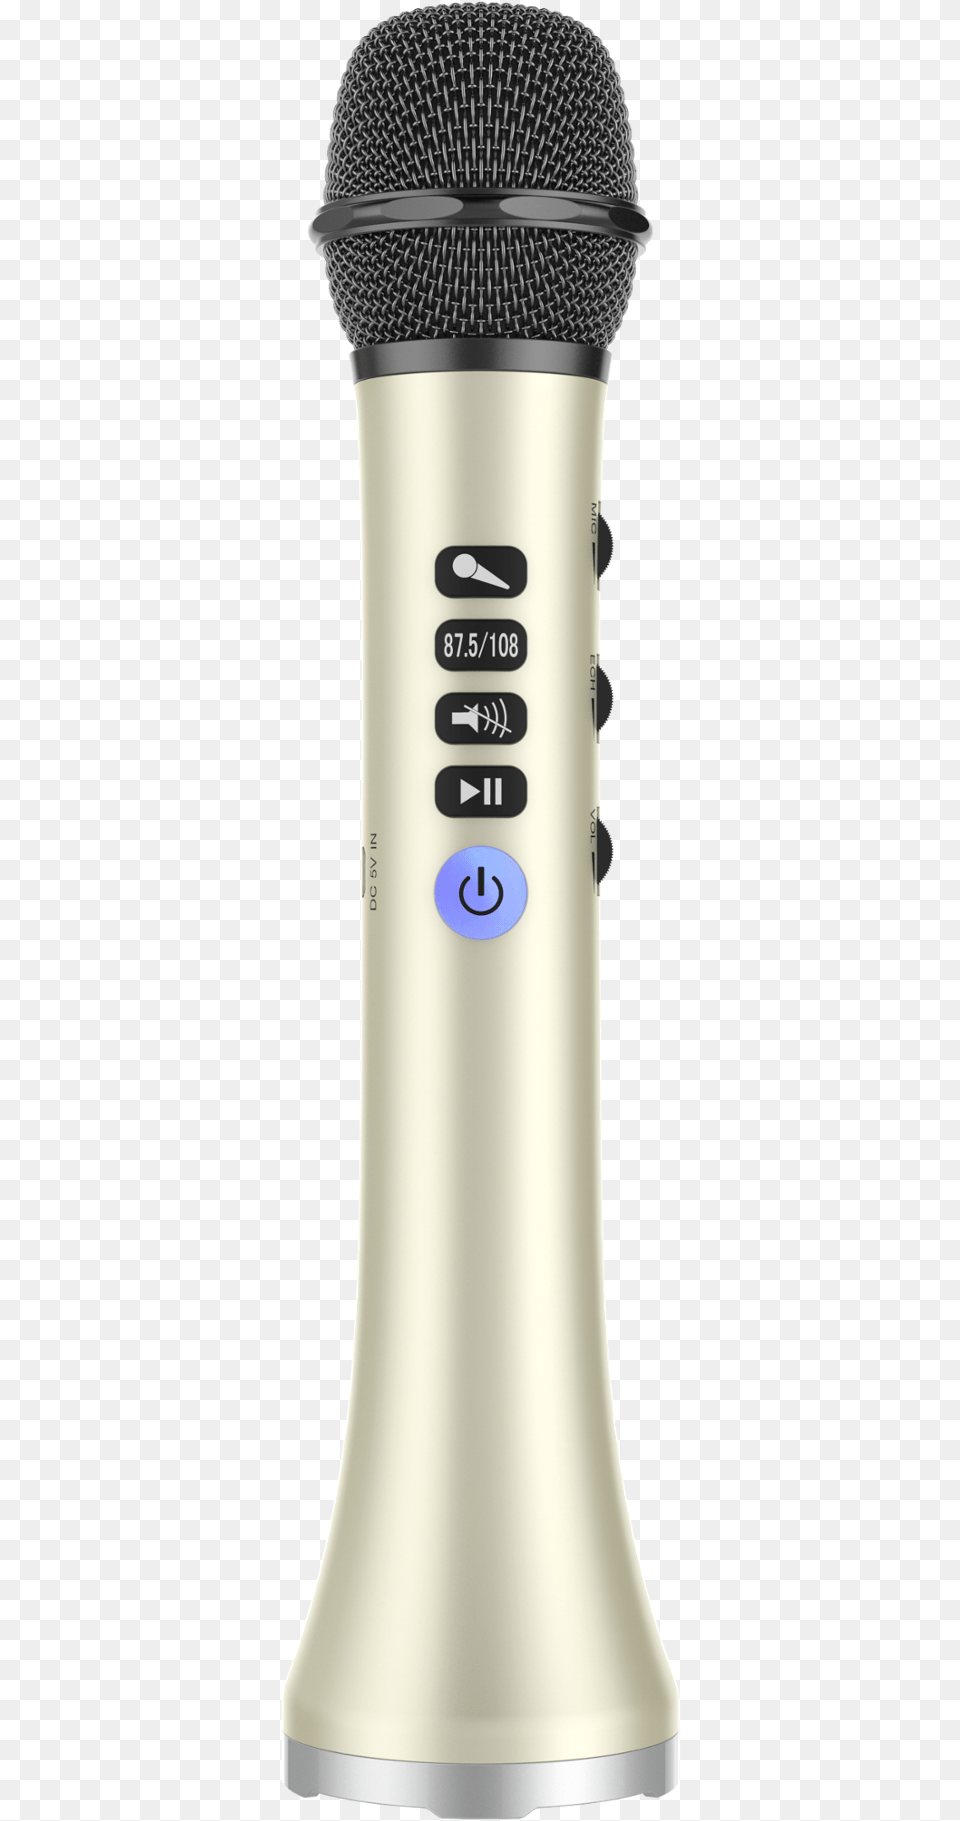 Wirless Microphone Wirless Microphone Suppliers And Microphone, Electrical Device, Bottle, Shaker Png Image